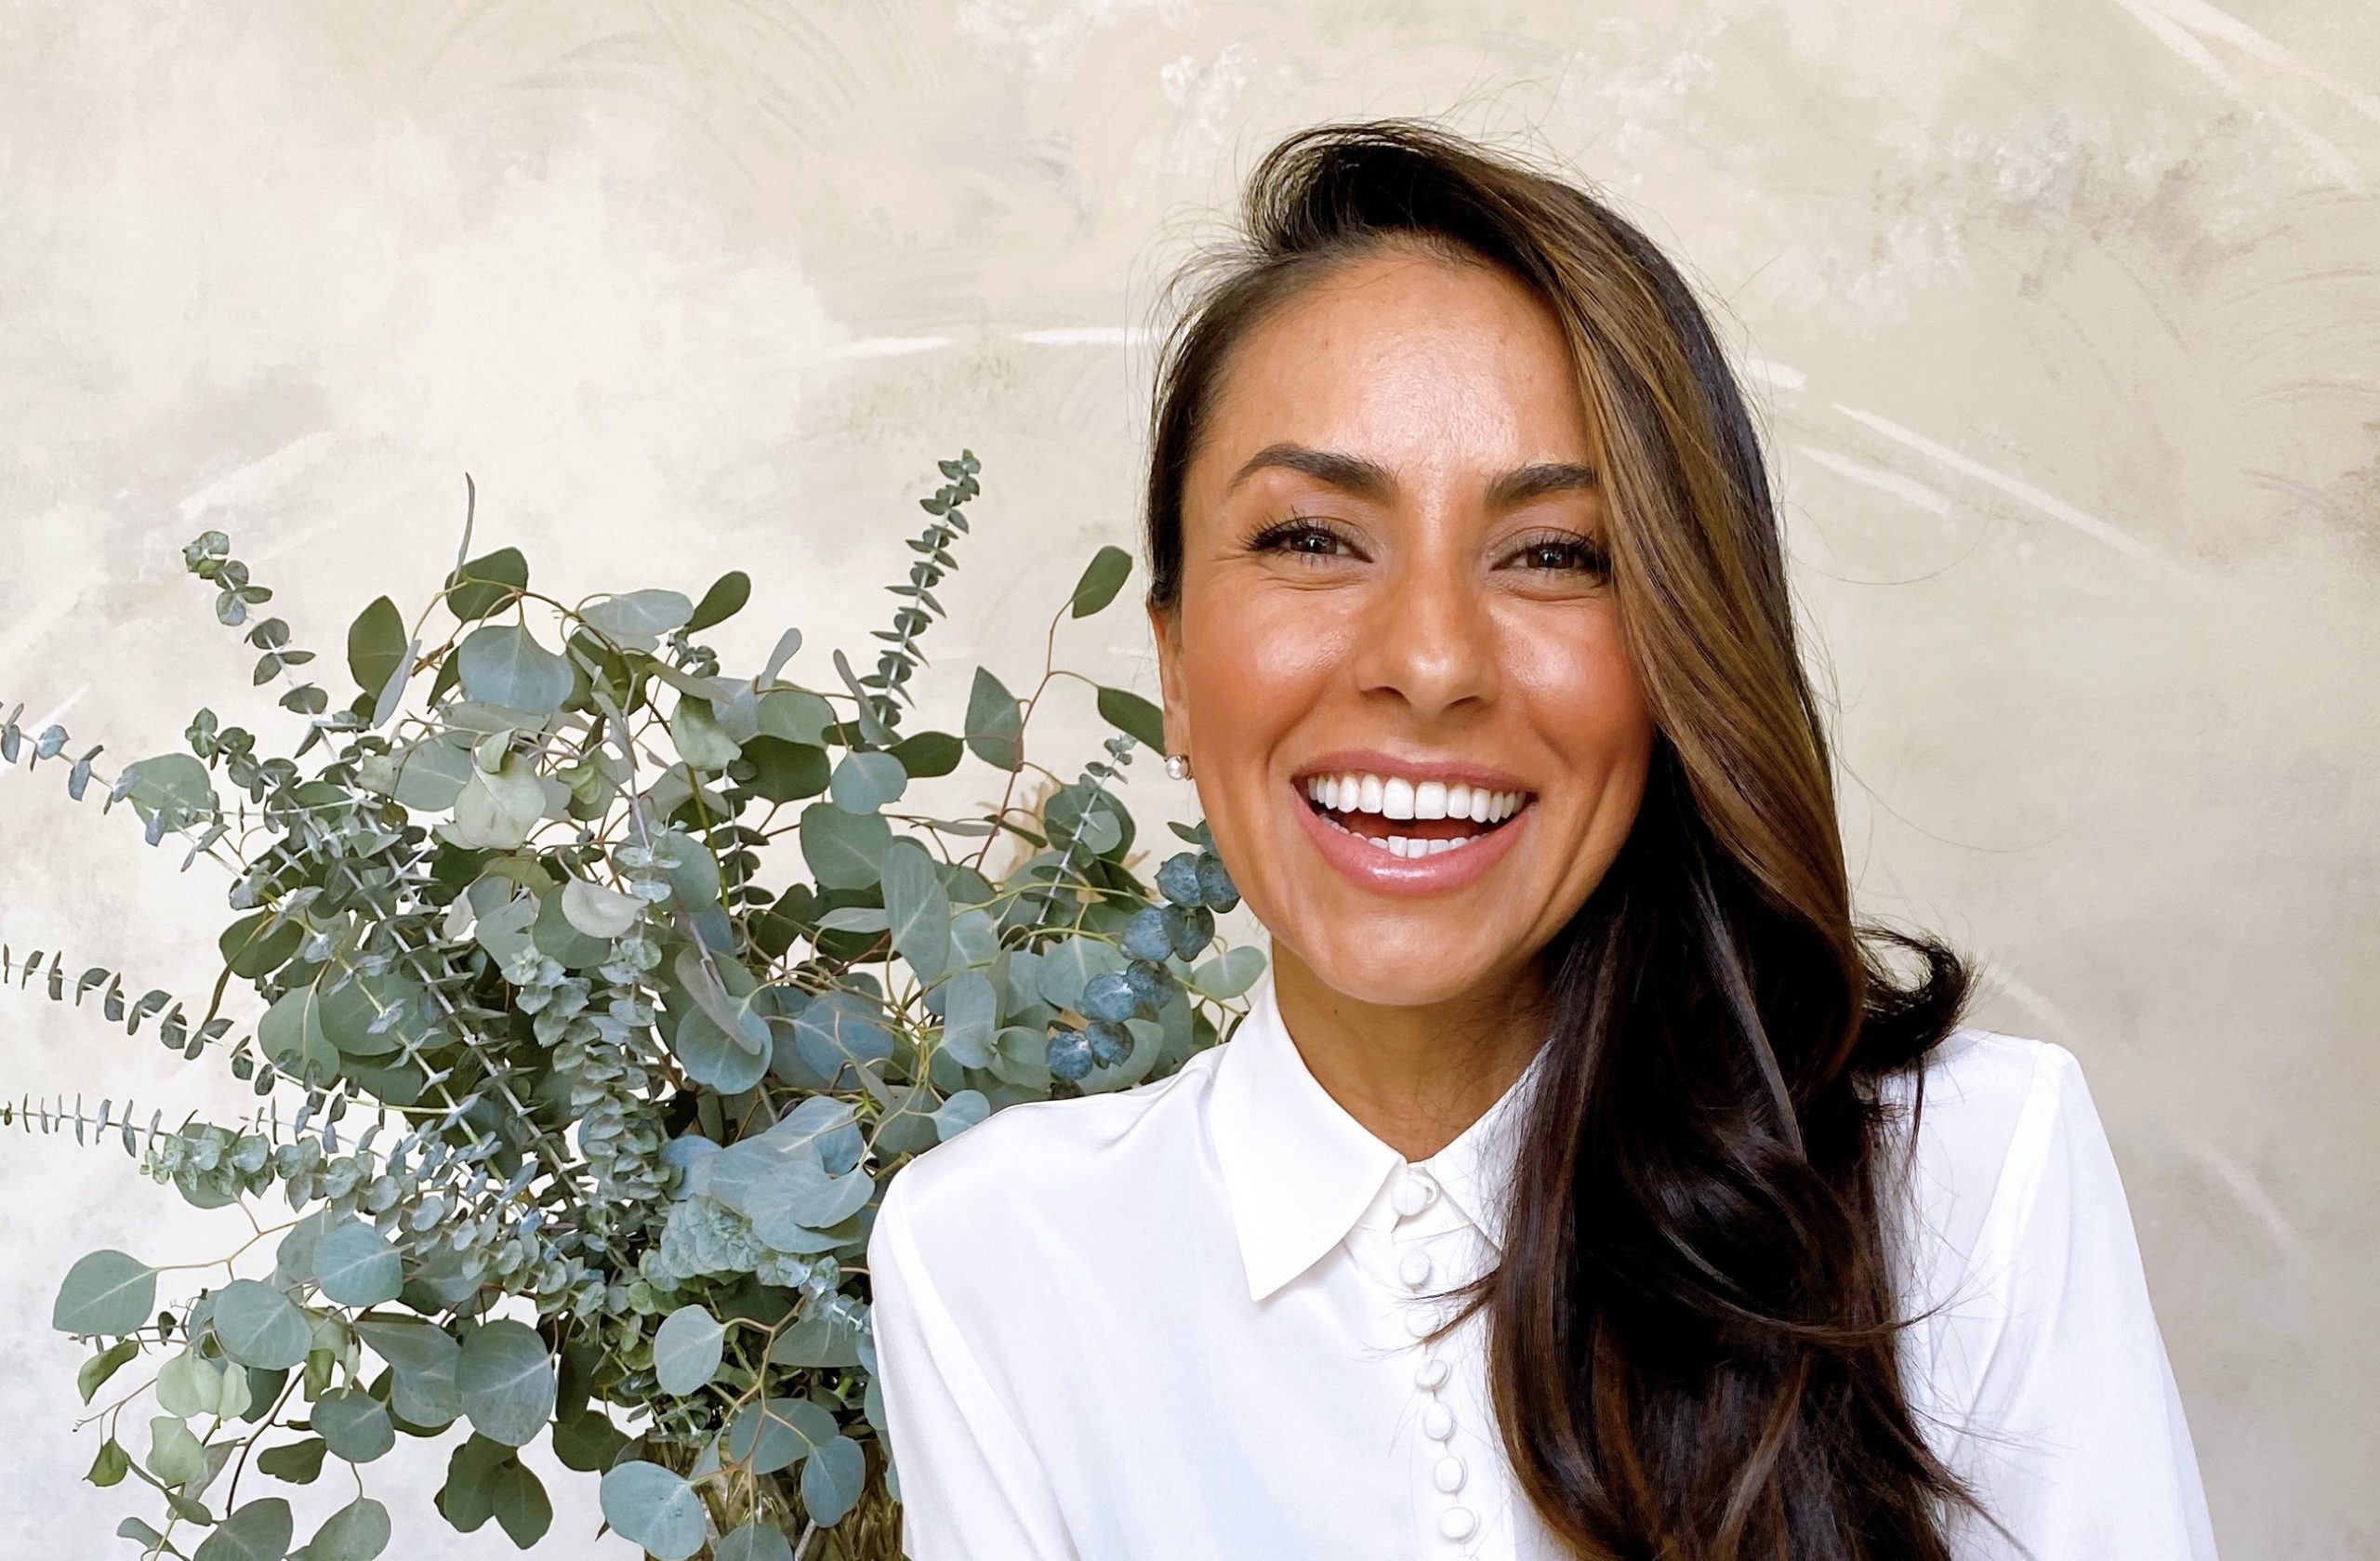 Celebrity holistic nutritionist Mona Sharma wants everyone to connect with how food makes them feel